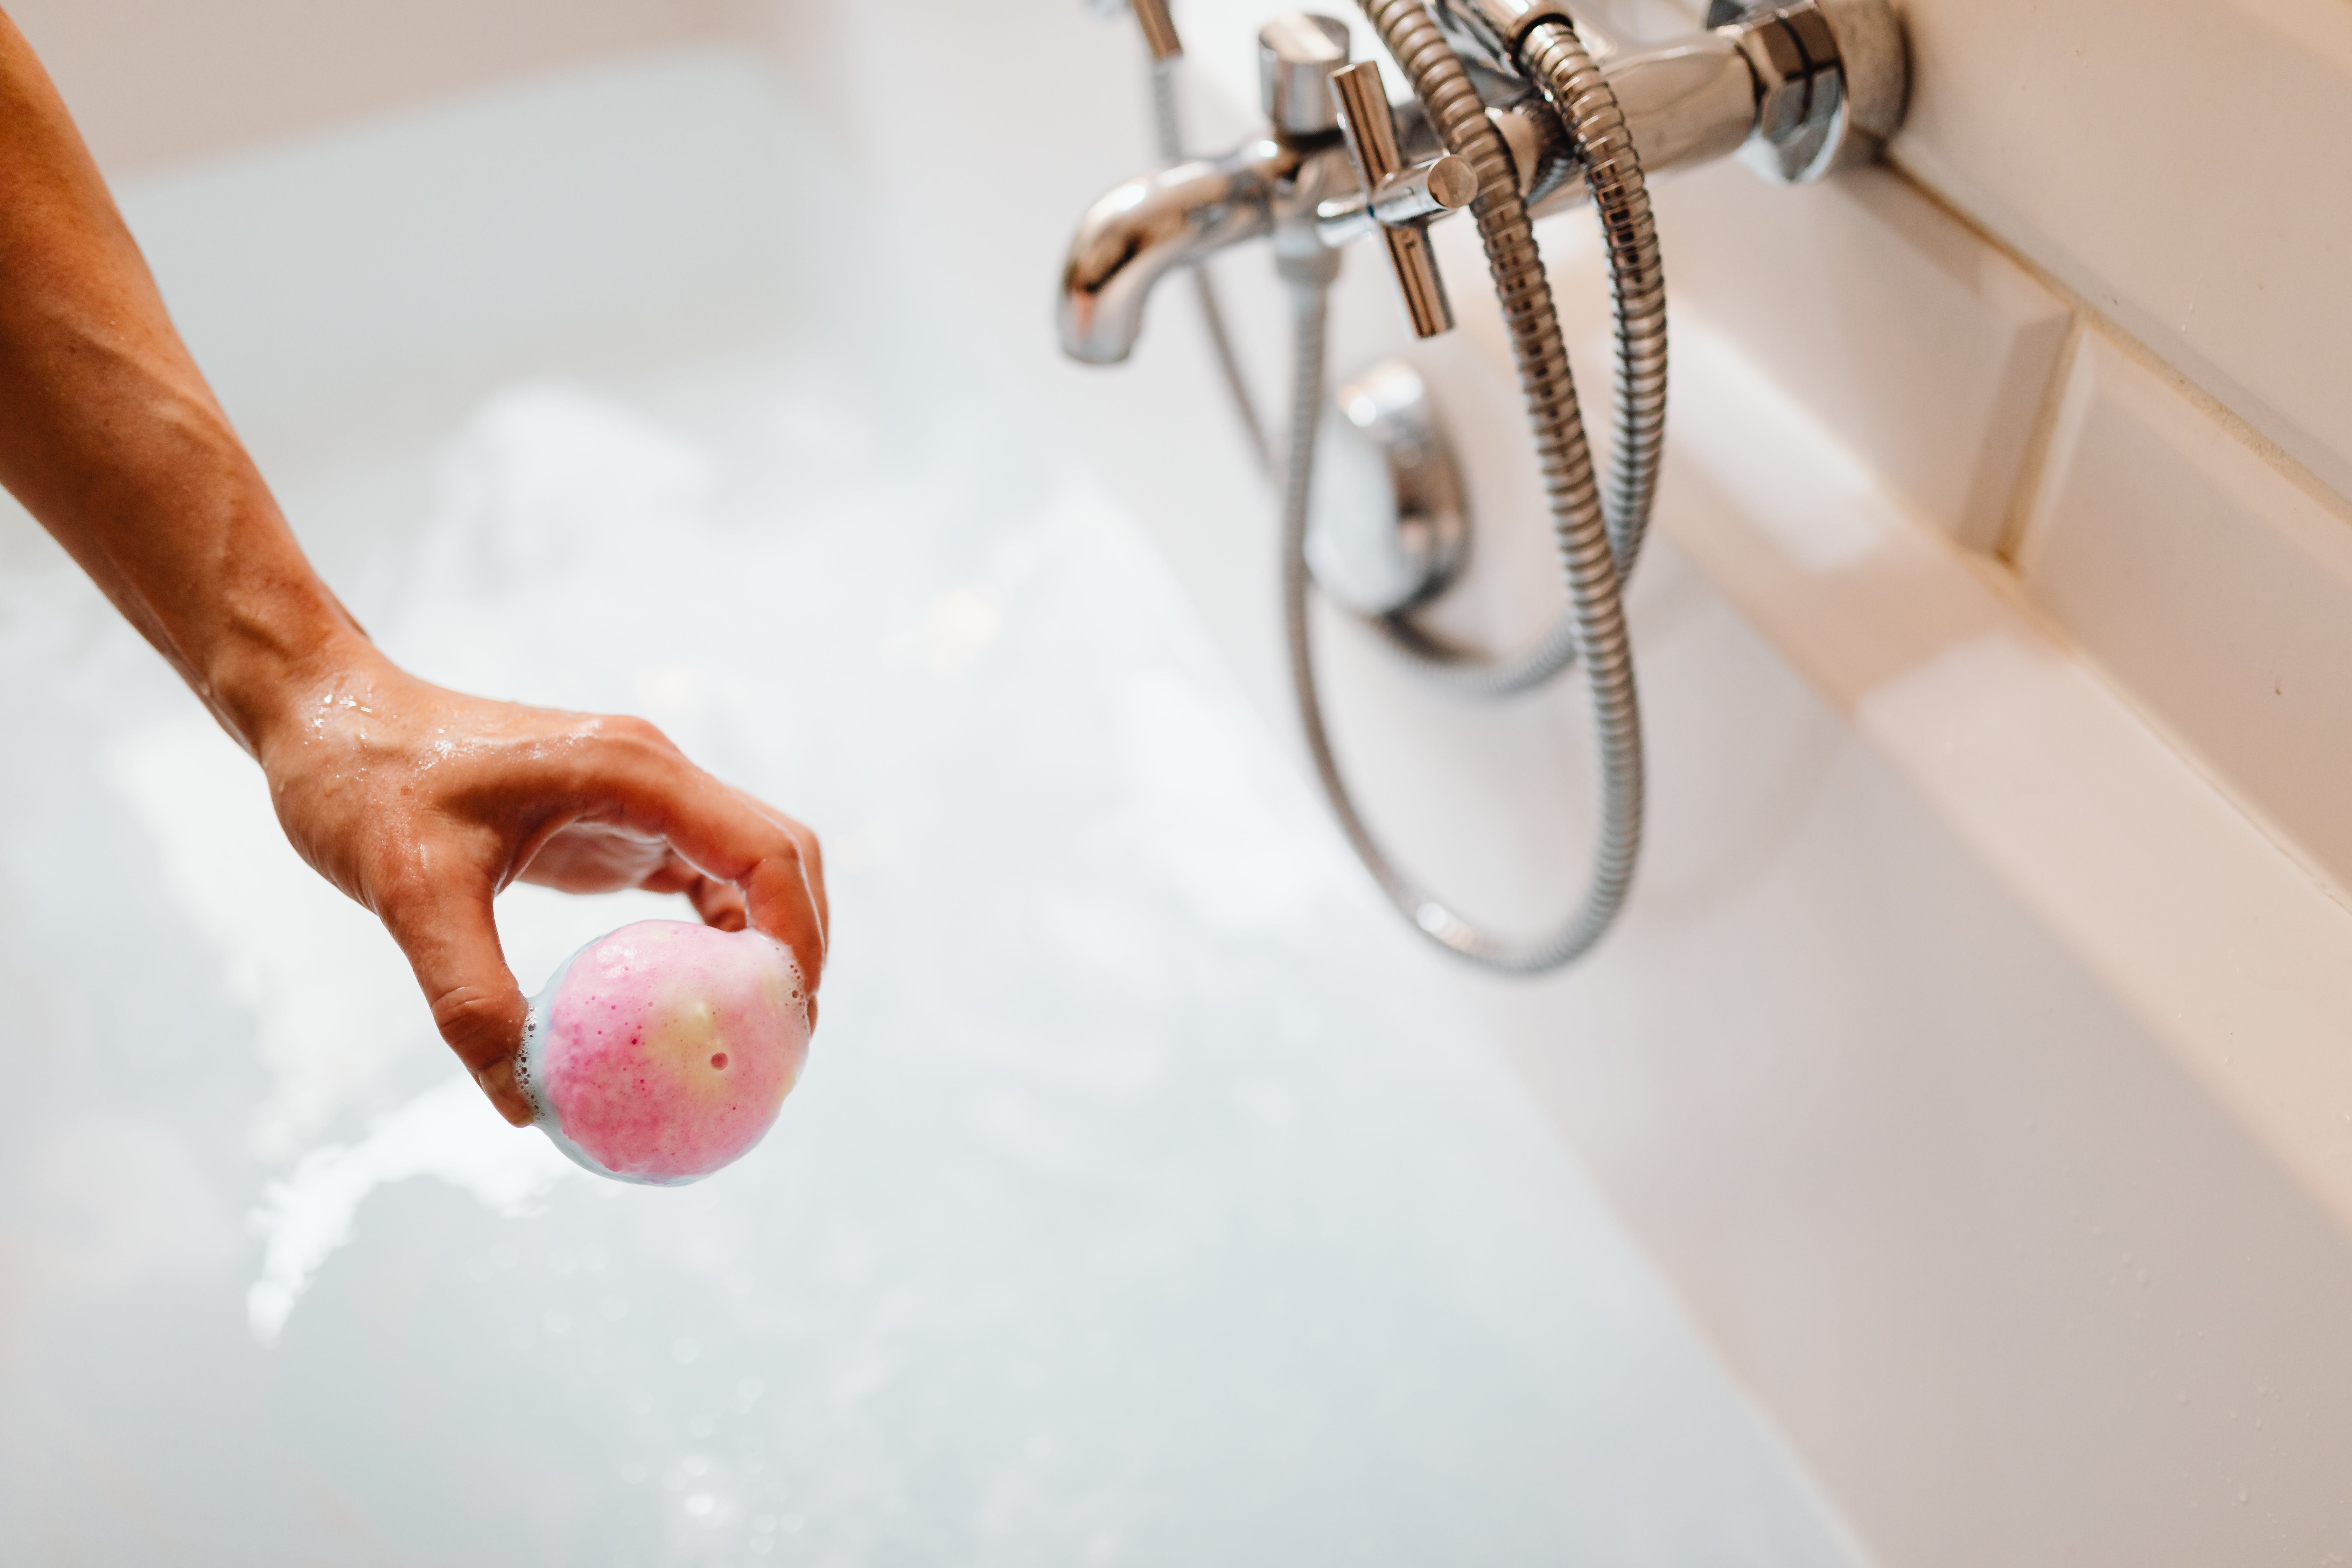 last-minute valentine's day idea: an at-home spa day using bath bombs